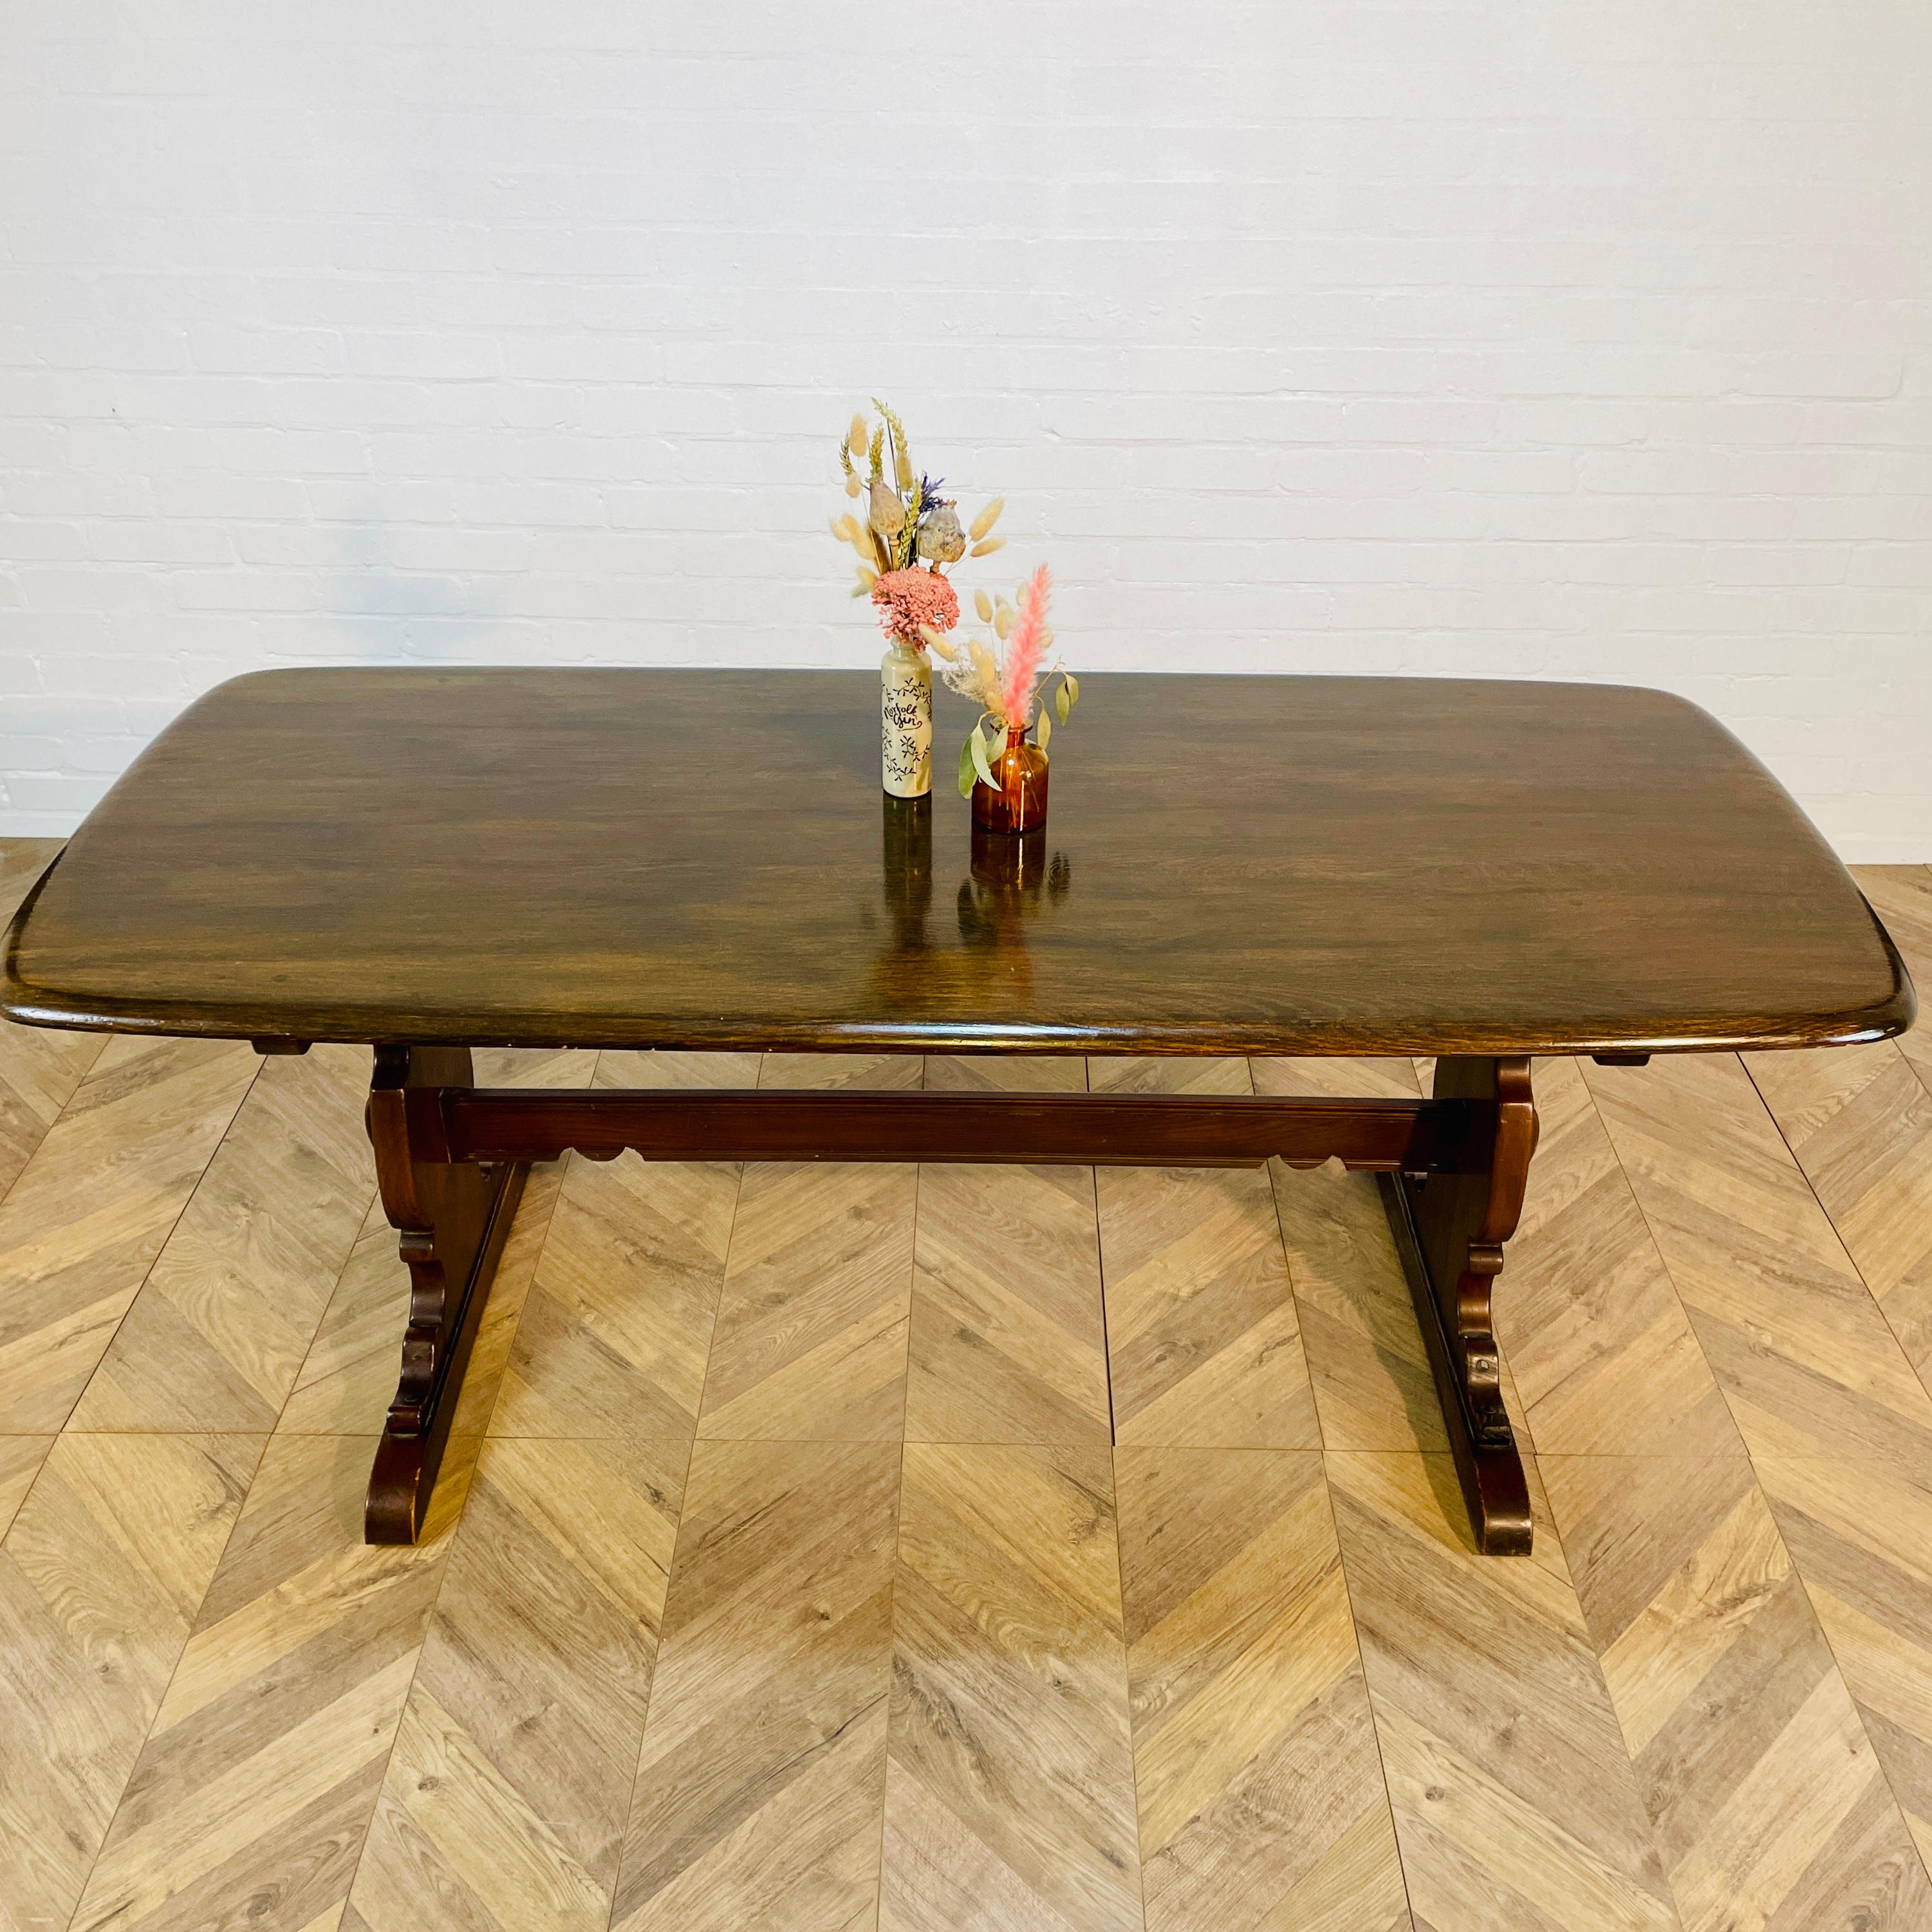 A Beautiful and Iconic, 1960s Ercol Refectory Table - Model Number 419

The table is from the company's popular Old Colonial range. Designed to sit up to six people, this is a classic piece from Ercol history.

The top is made from elm.

The table